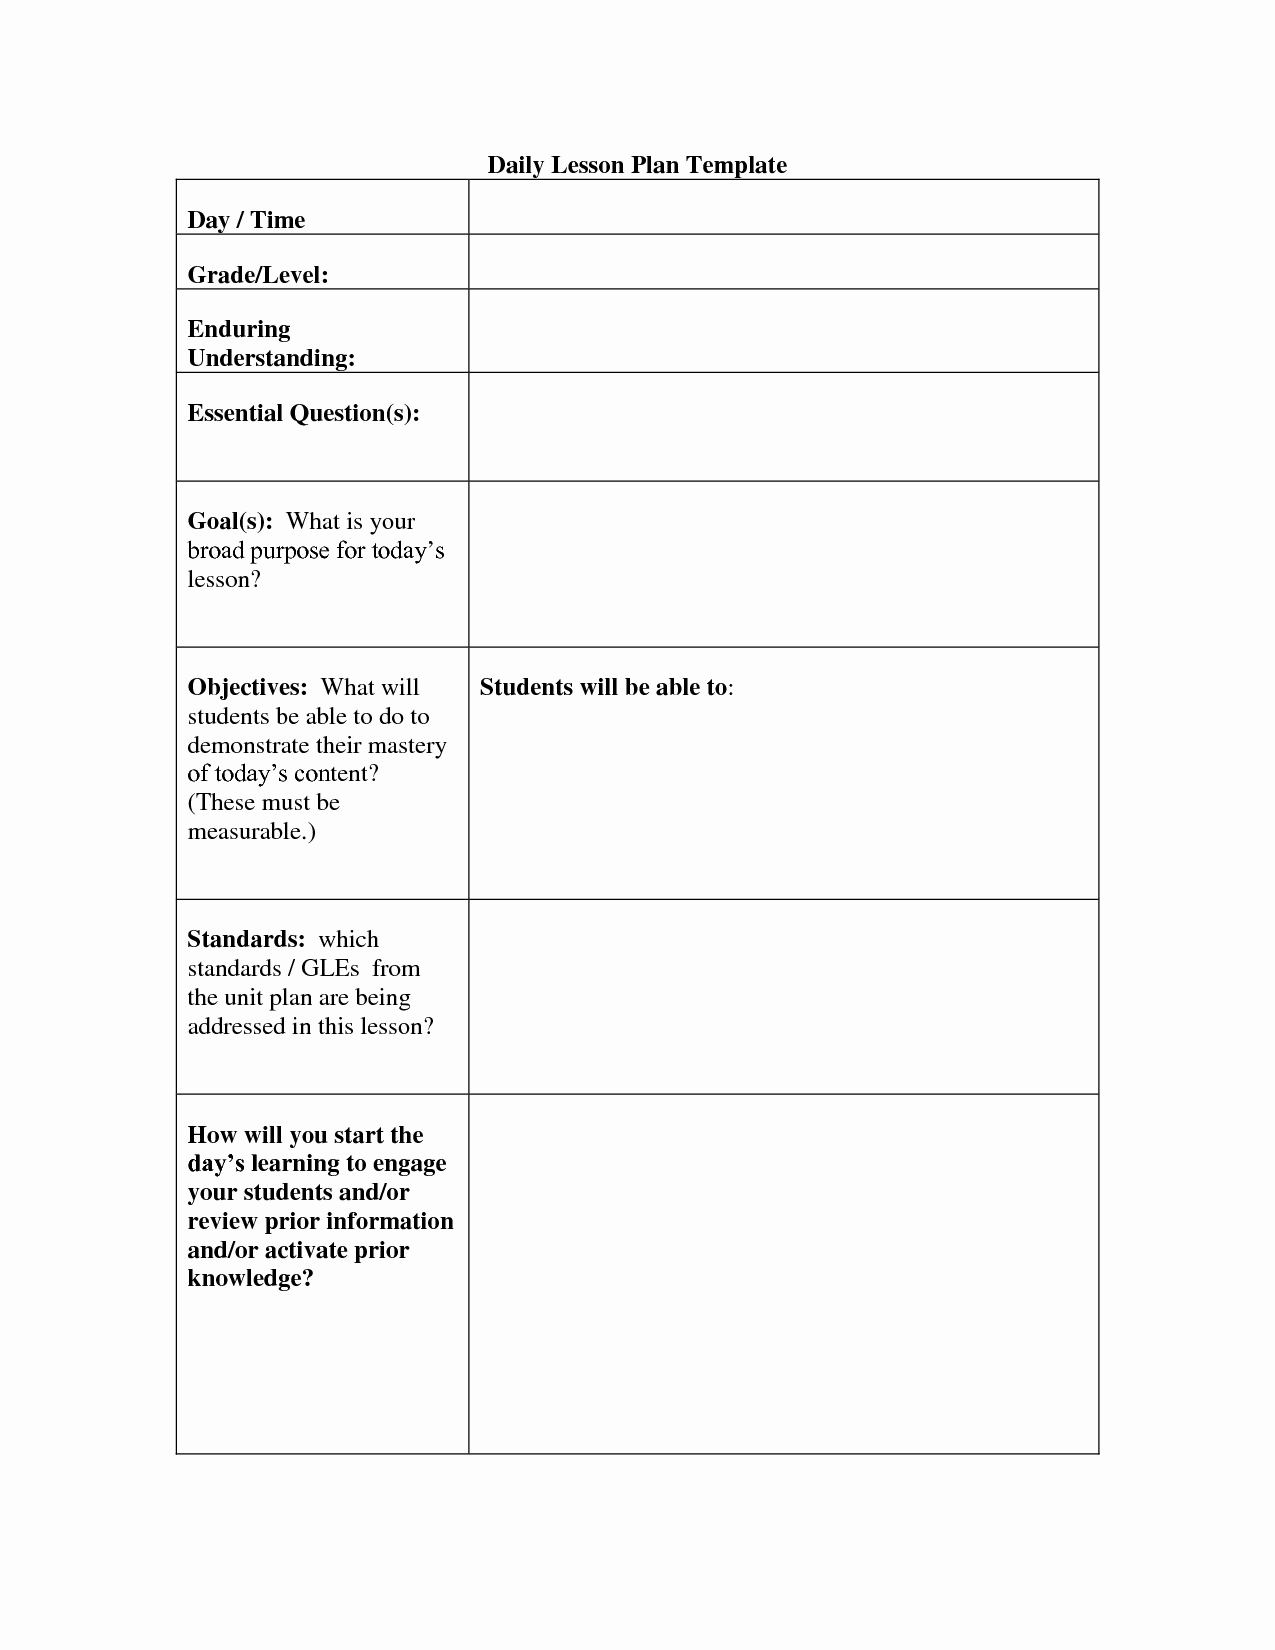 Daily Lesson Plan Template Doc Luxury Daily Lesson Plan Template Fotolip Rich Image and